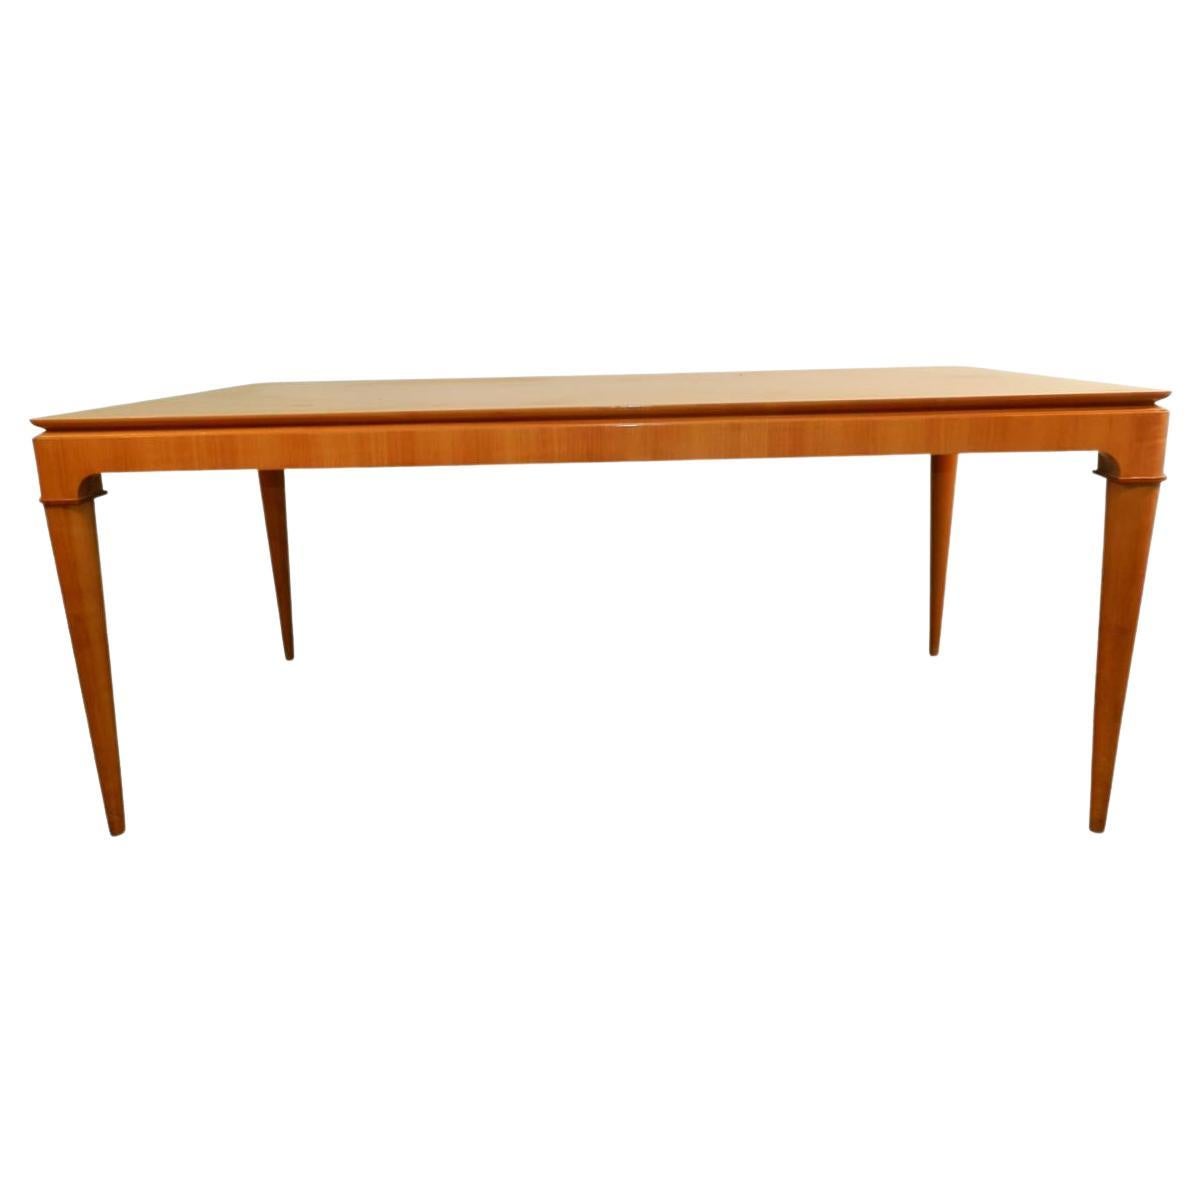 1940 Art Deco Cherry Dining Room Table For Sale